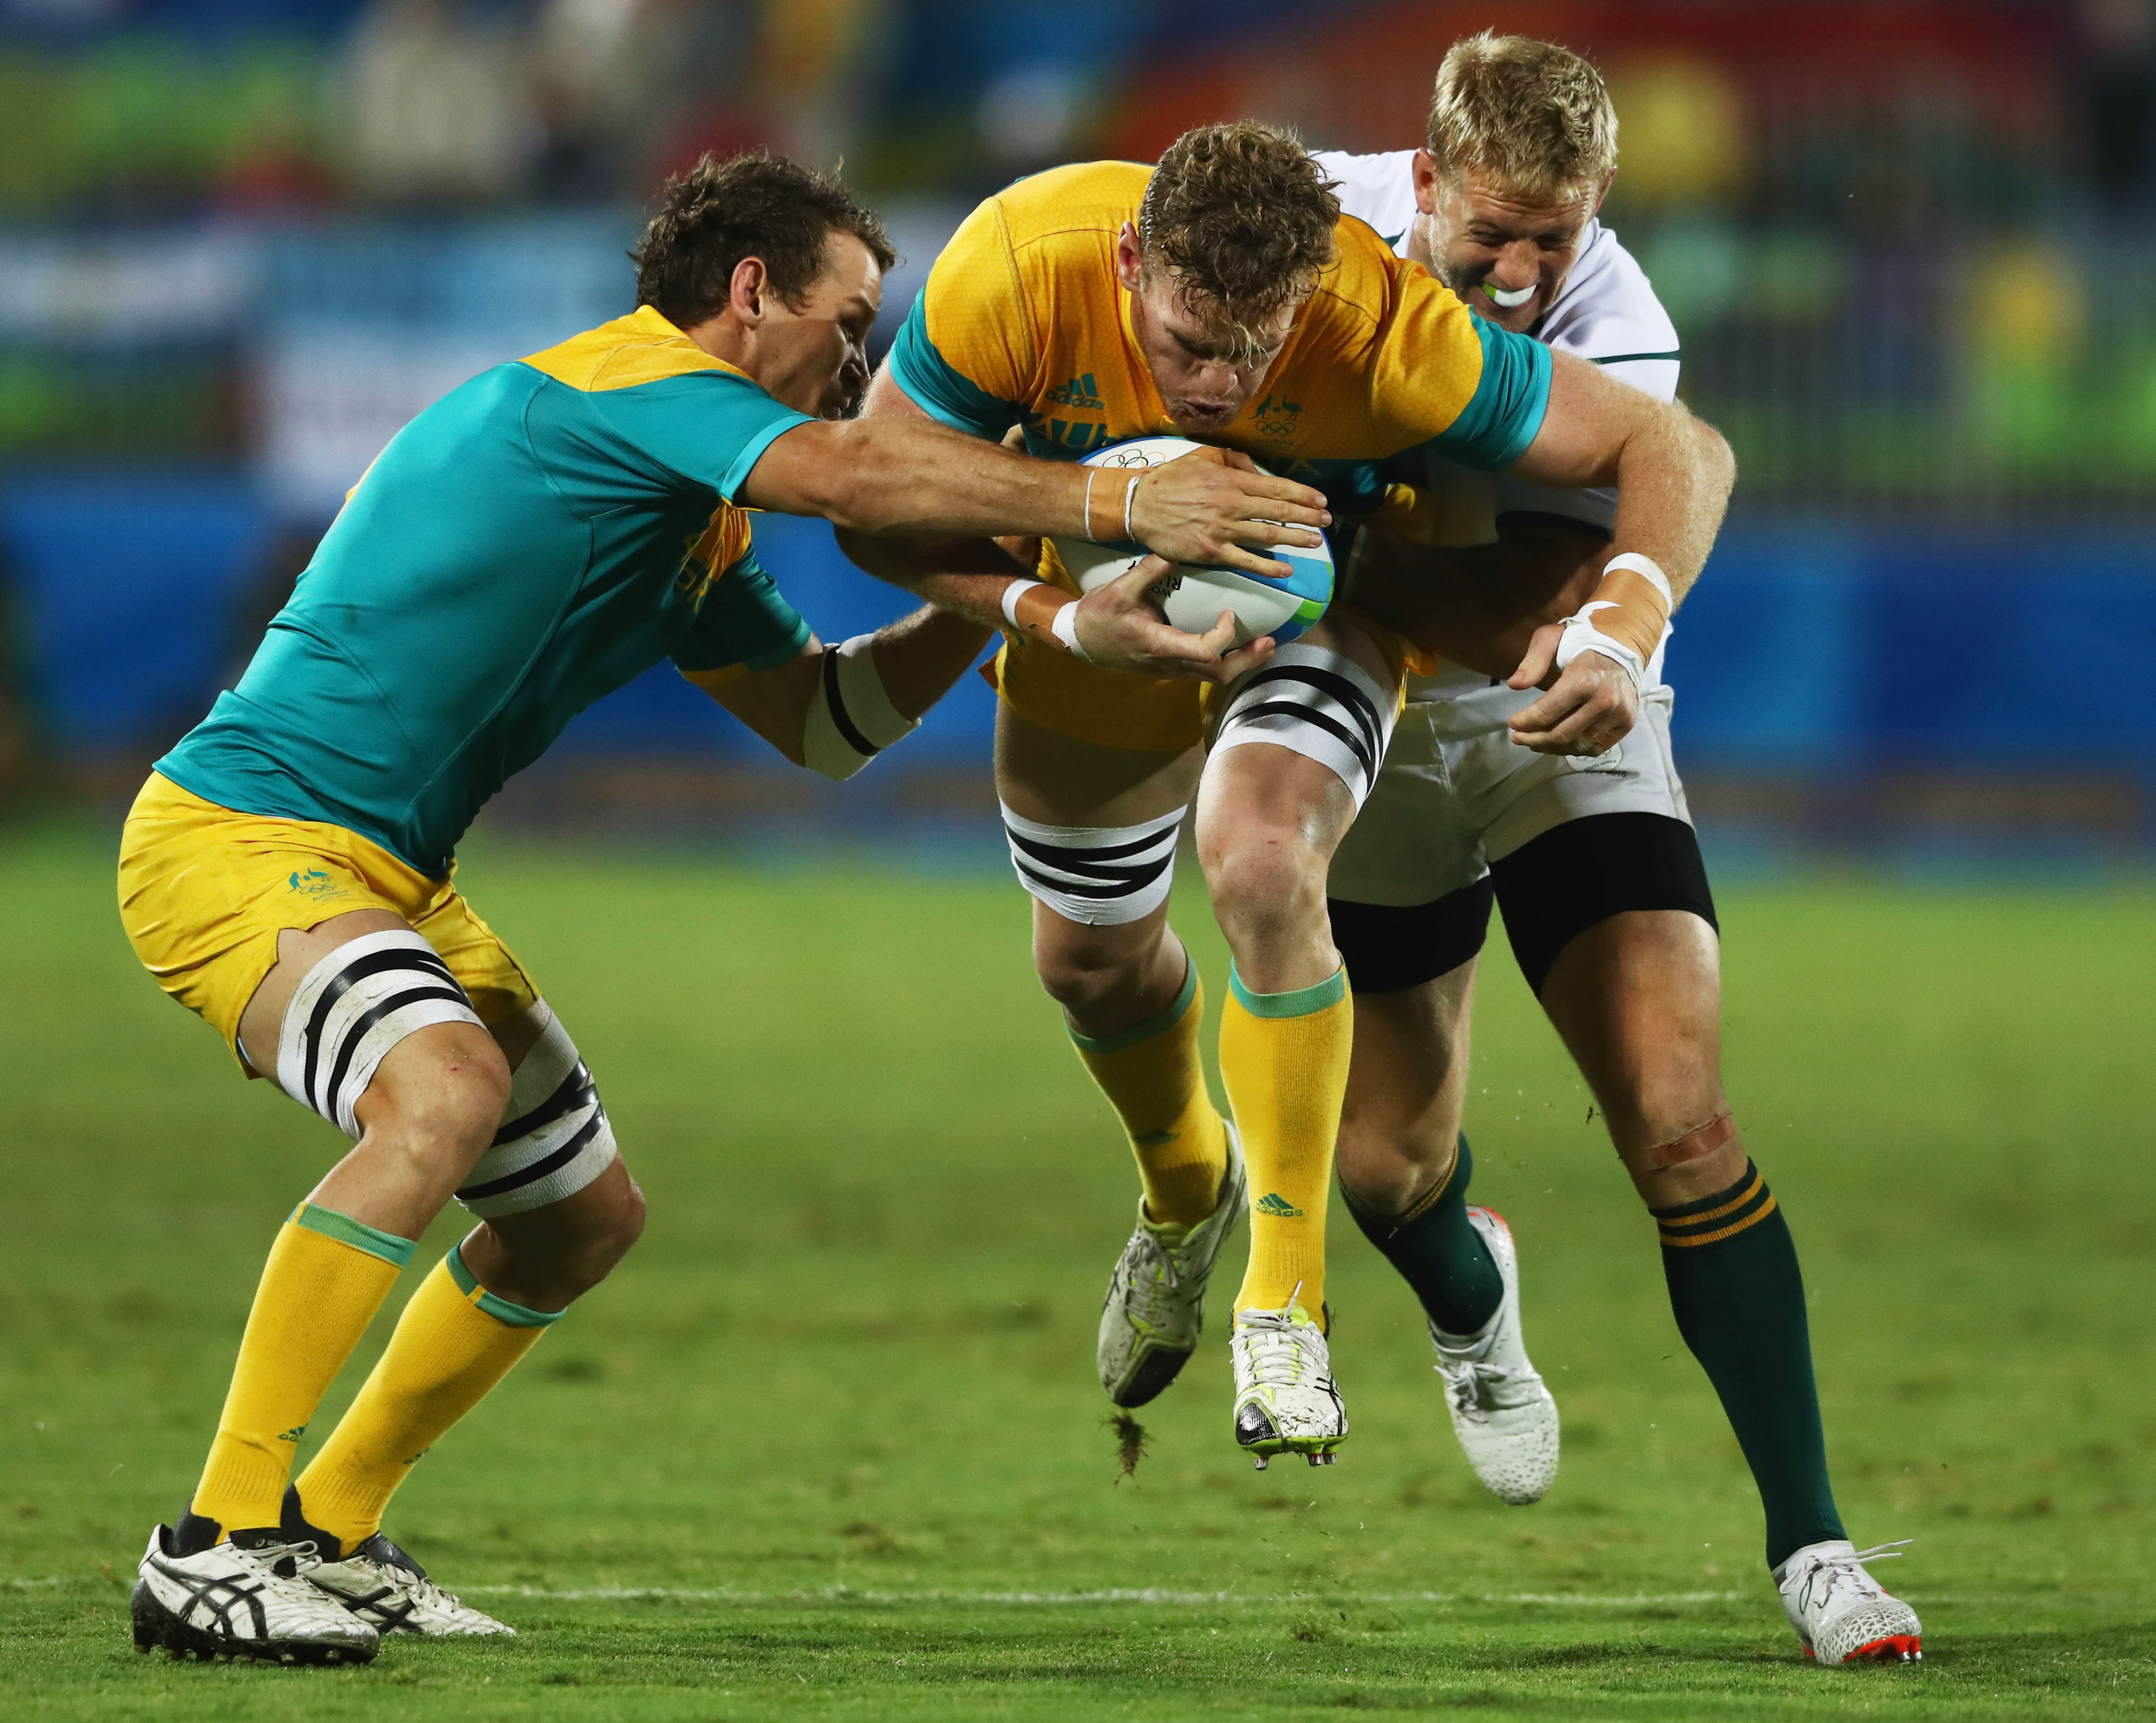 watch rugby matches online